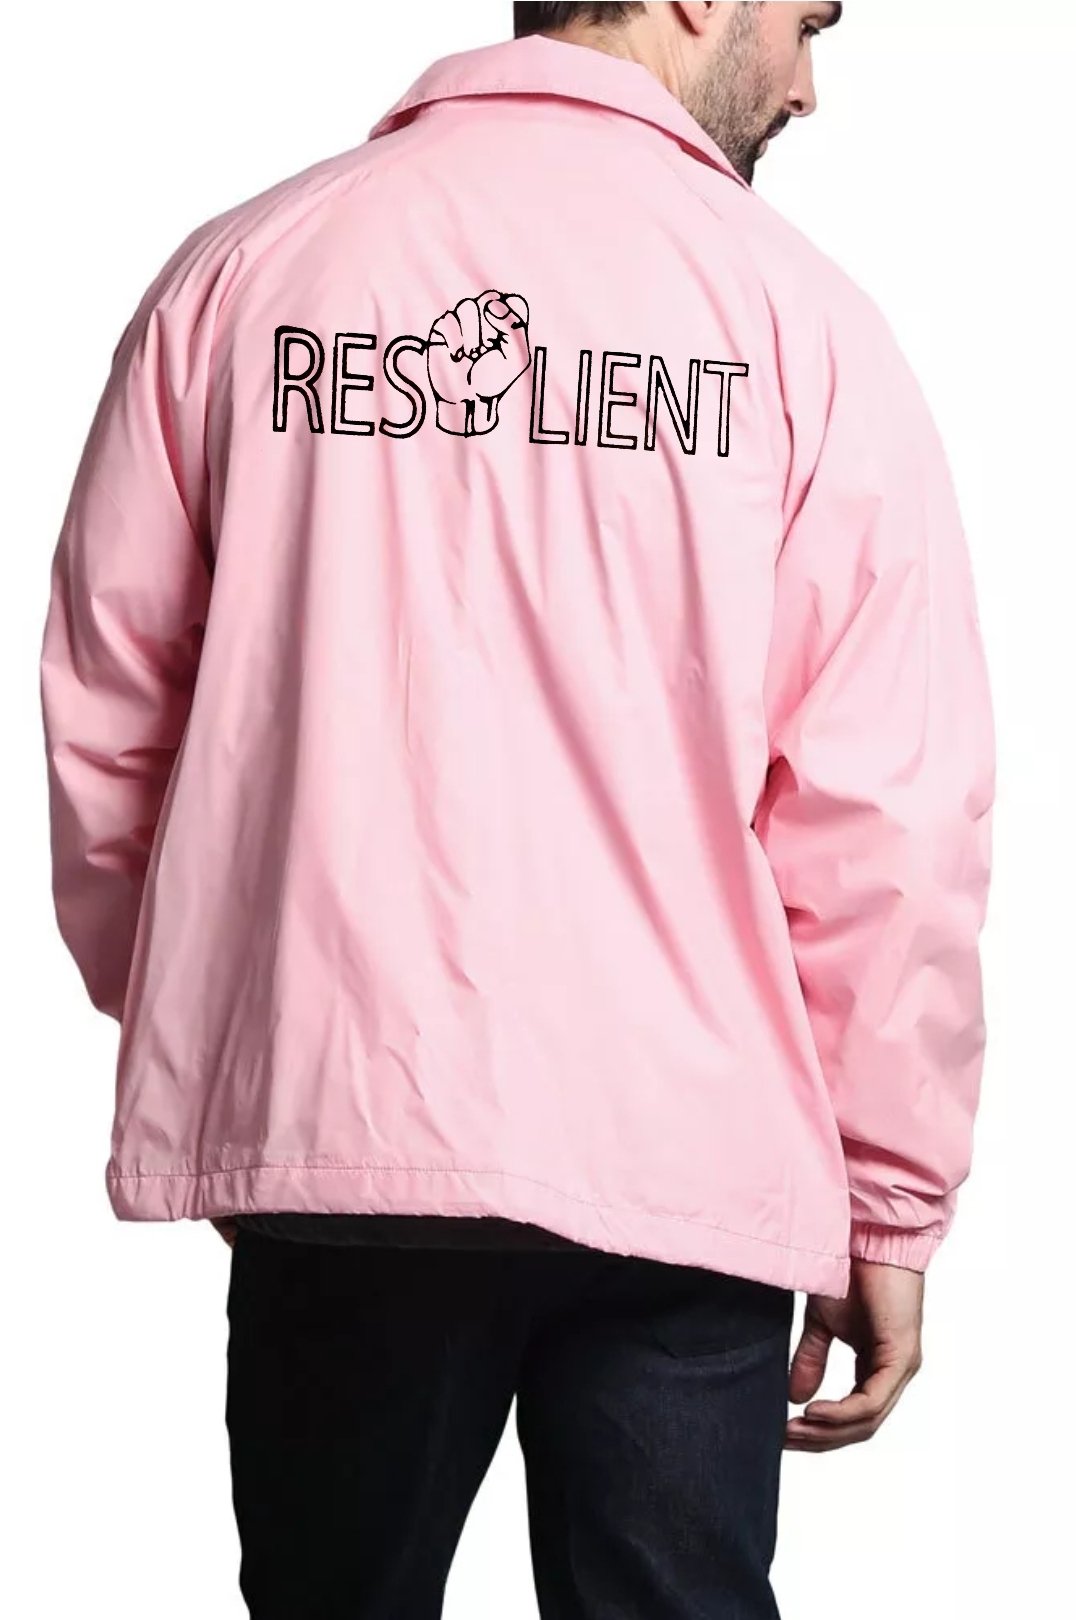 Resilient Jacket